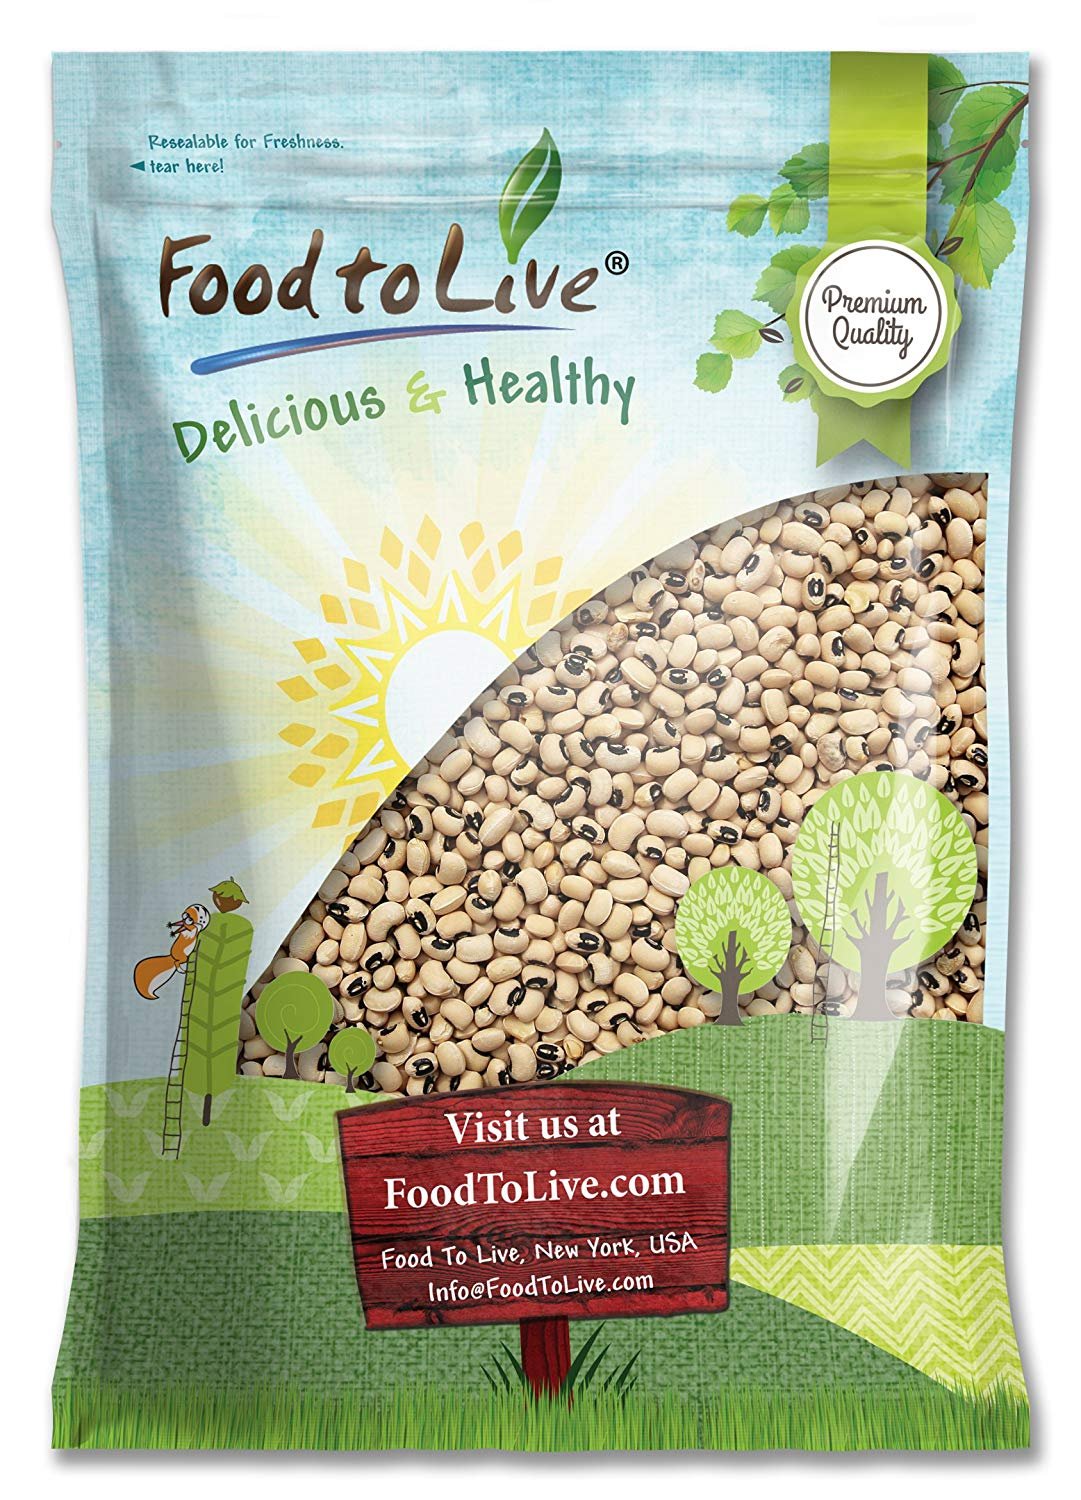 Black-Eyed Peas — Non-GMO Verified, Raw Dried Whole Cow Peas, Kosher, Vegan, Sproutable, Bulk Black-Eyed Peas. High in Dietary Fiber, Easy to Cook. Great for Soups, Stews, Salads and Vegan Burgers